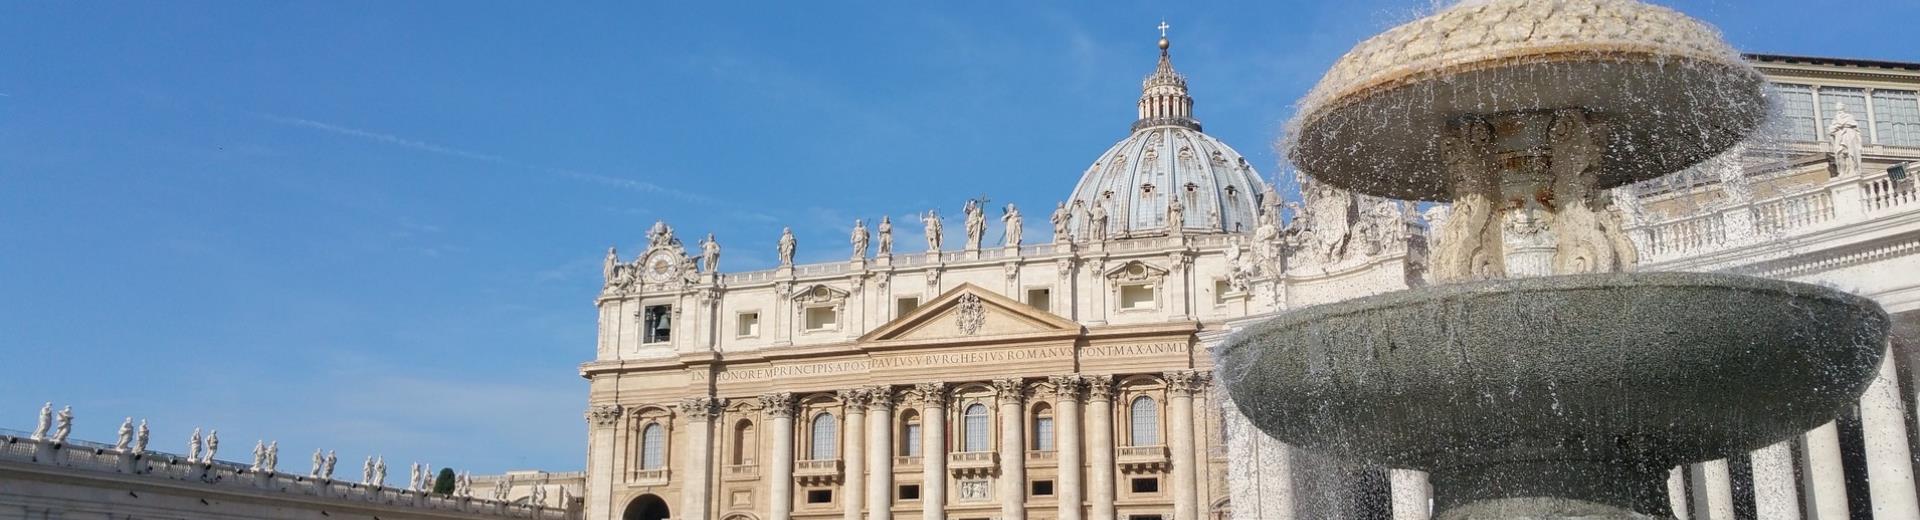 The Best Western Plus Hotel Spring House is located less than 200 metres from the Vatican museums